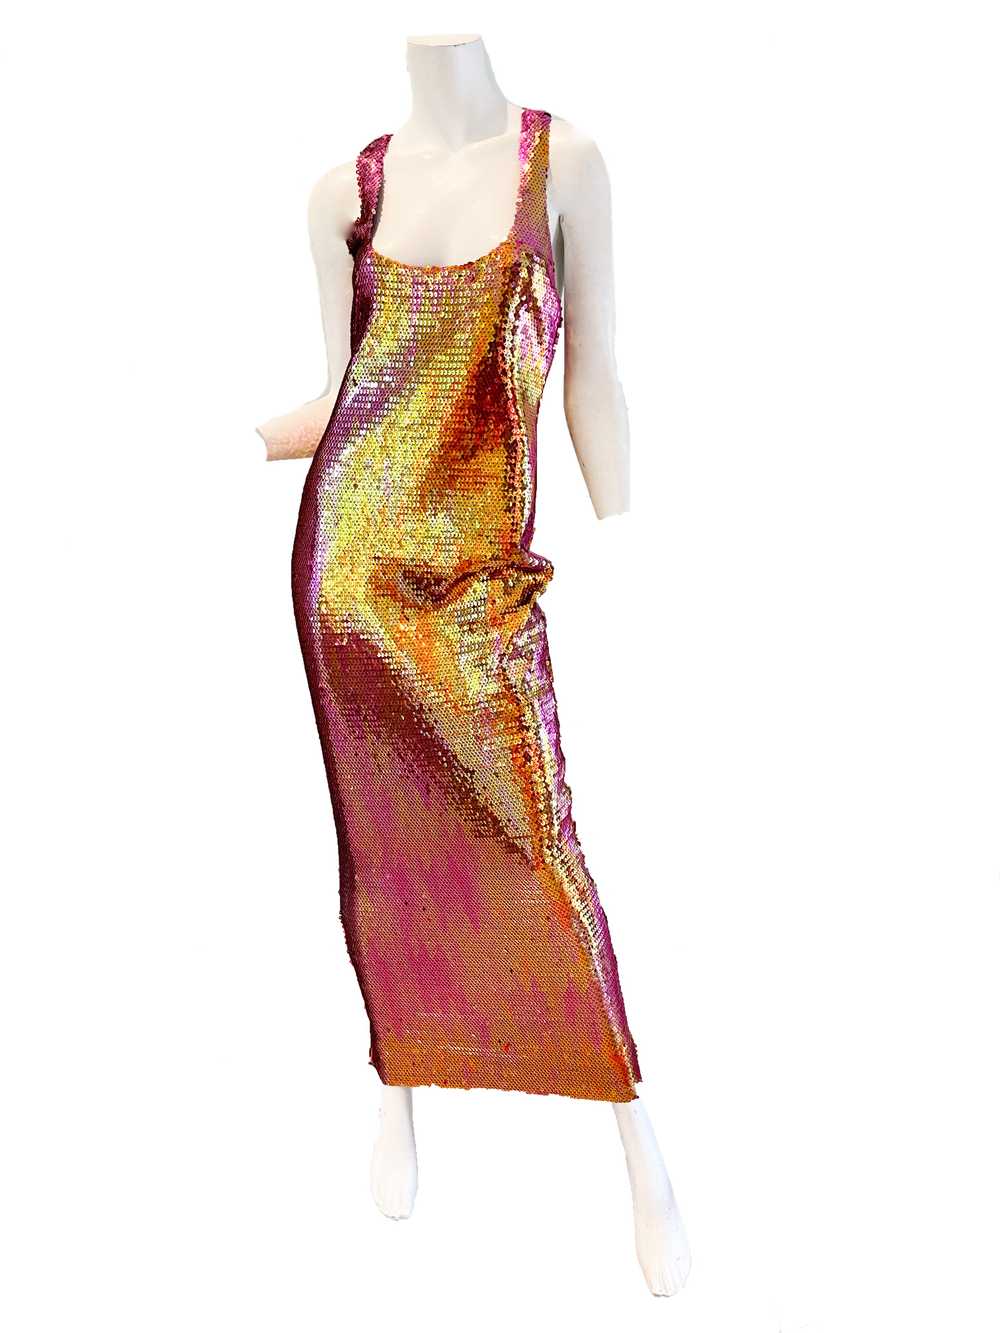 1988 STEPHEN SPROUSE Sequin Gown - image 5